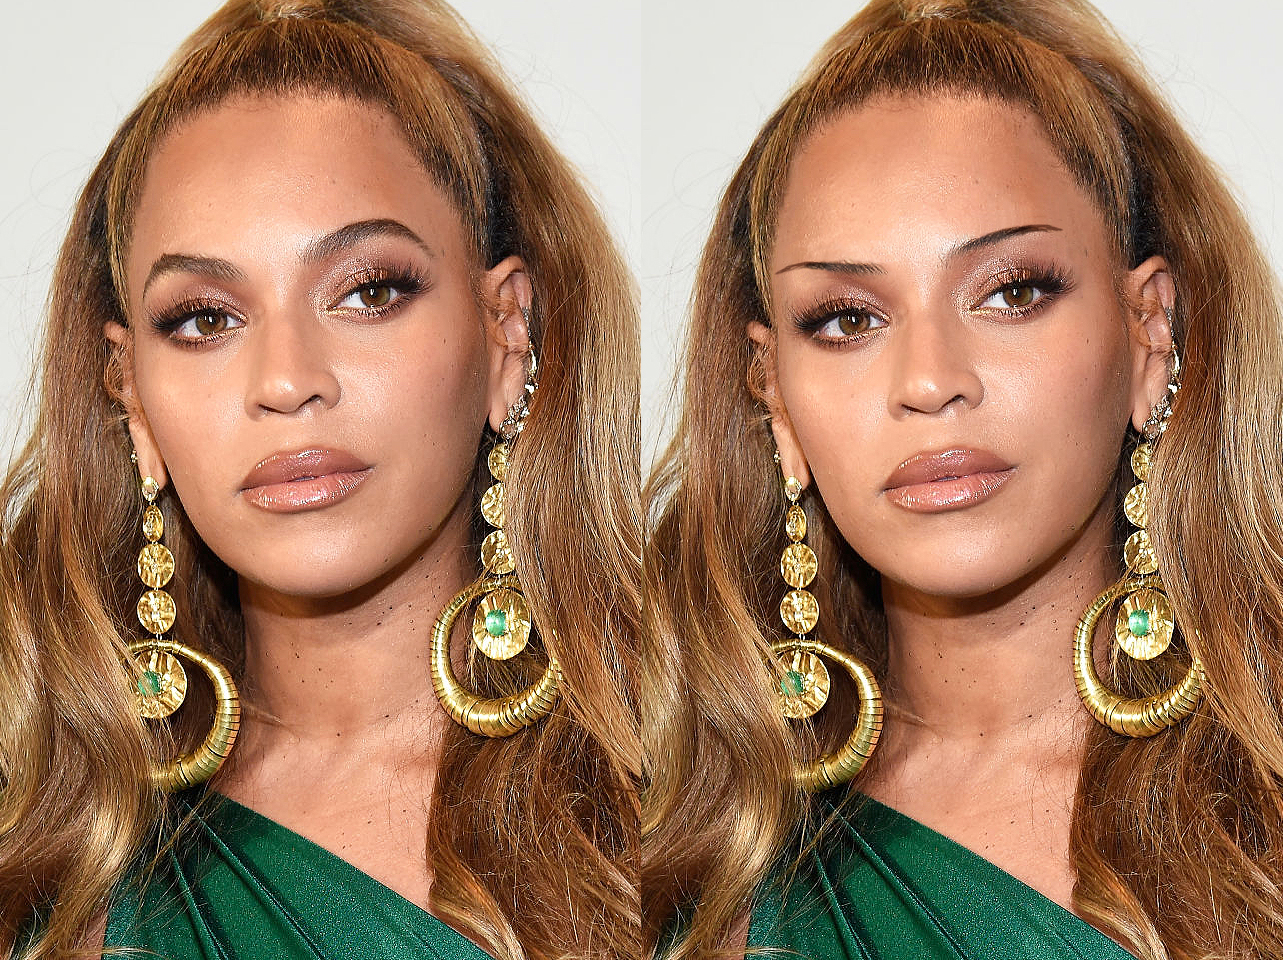 Beyonce's signature brows from 2017 vs a digitally edited thin-brow look | Source: Getty Images